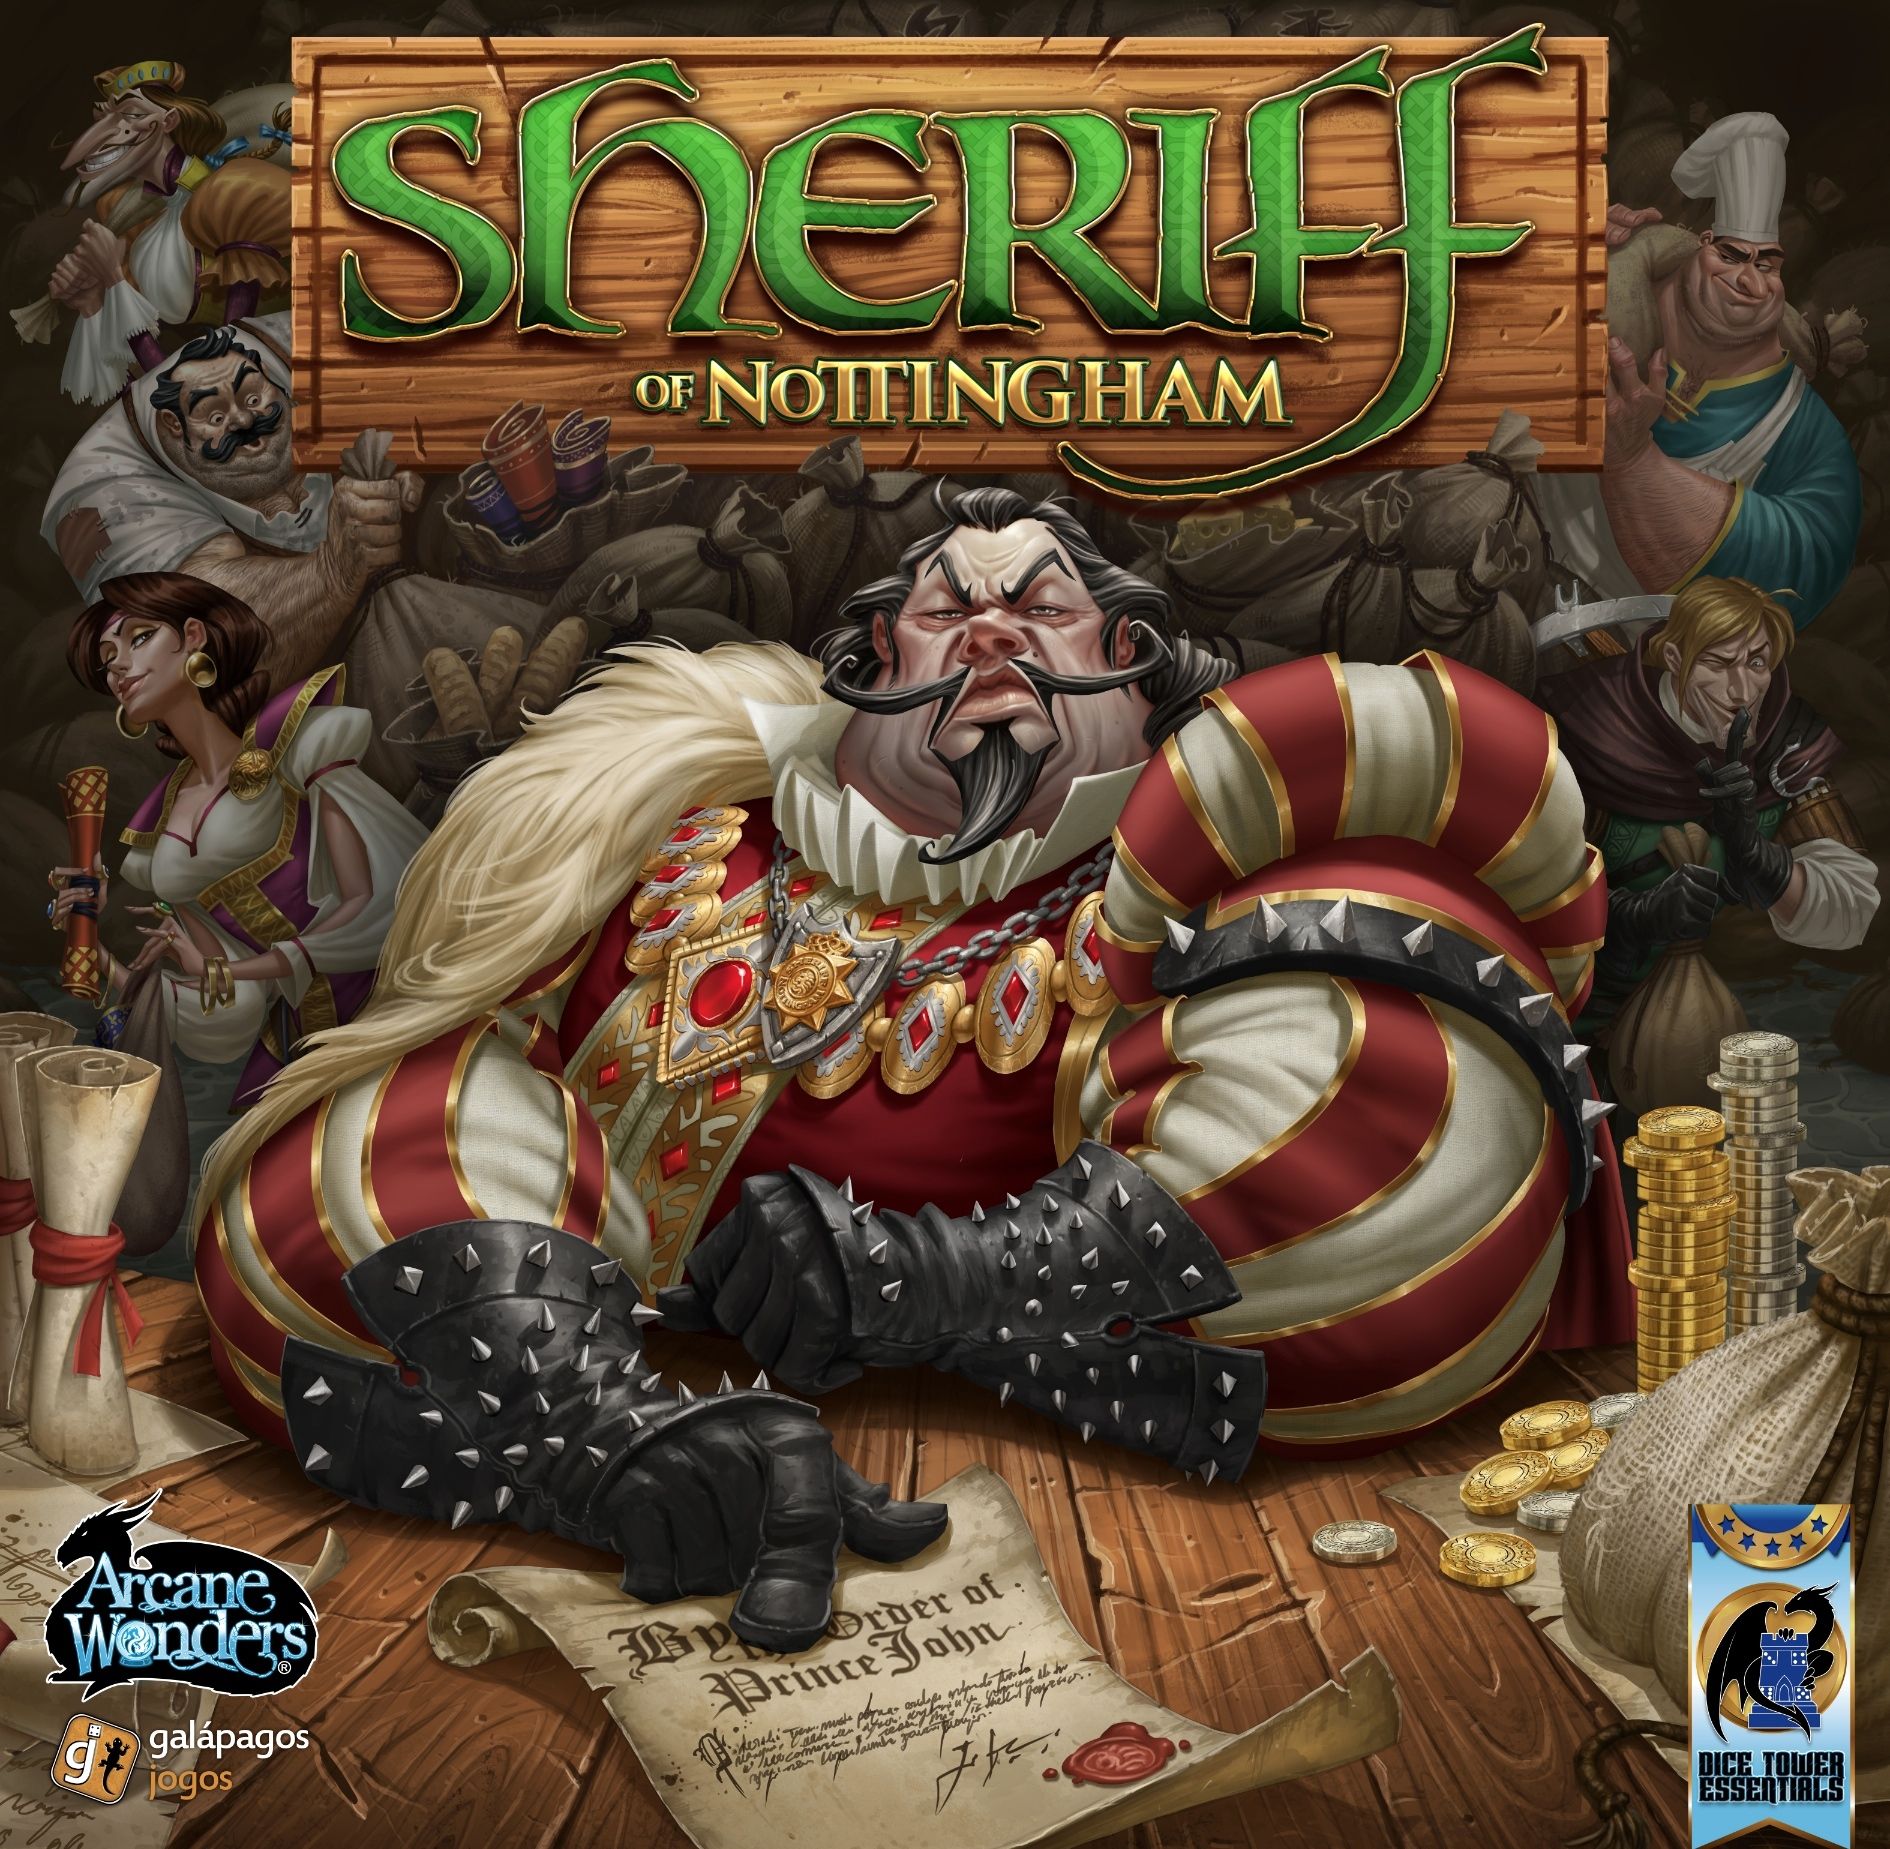 Read more about the article Sheriff of Nottingham